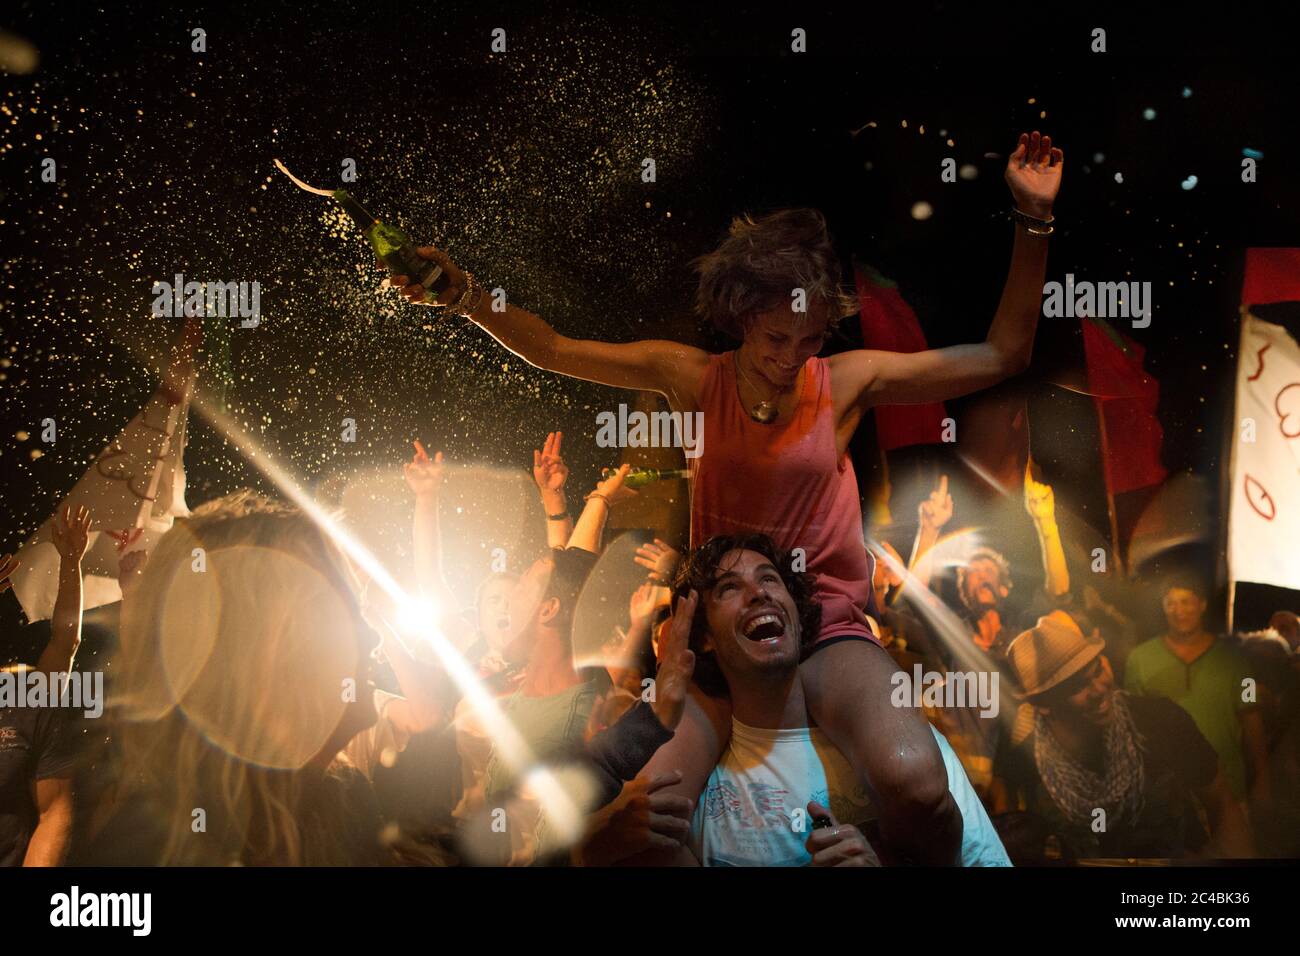 Revellers at an open air concert, smiling man carrying woman on his shoulders, arms outstretched, holding beer bottle. Stock Photo